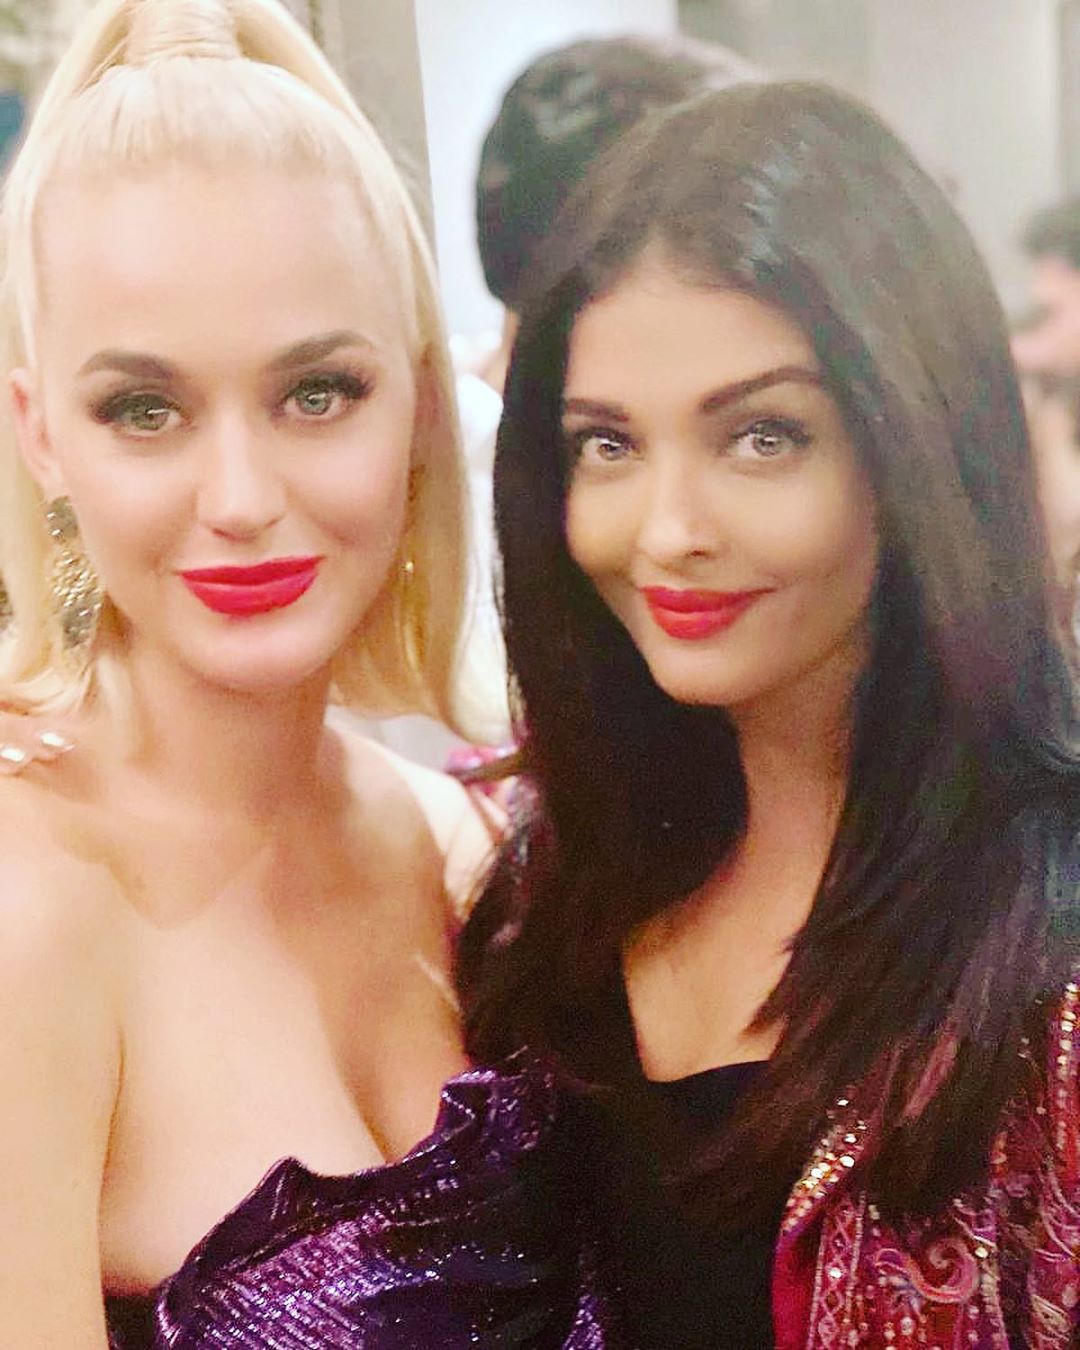 Aishwarya Rai Bachchan posts this picture with Katy Perry